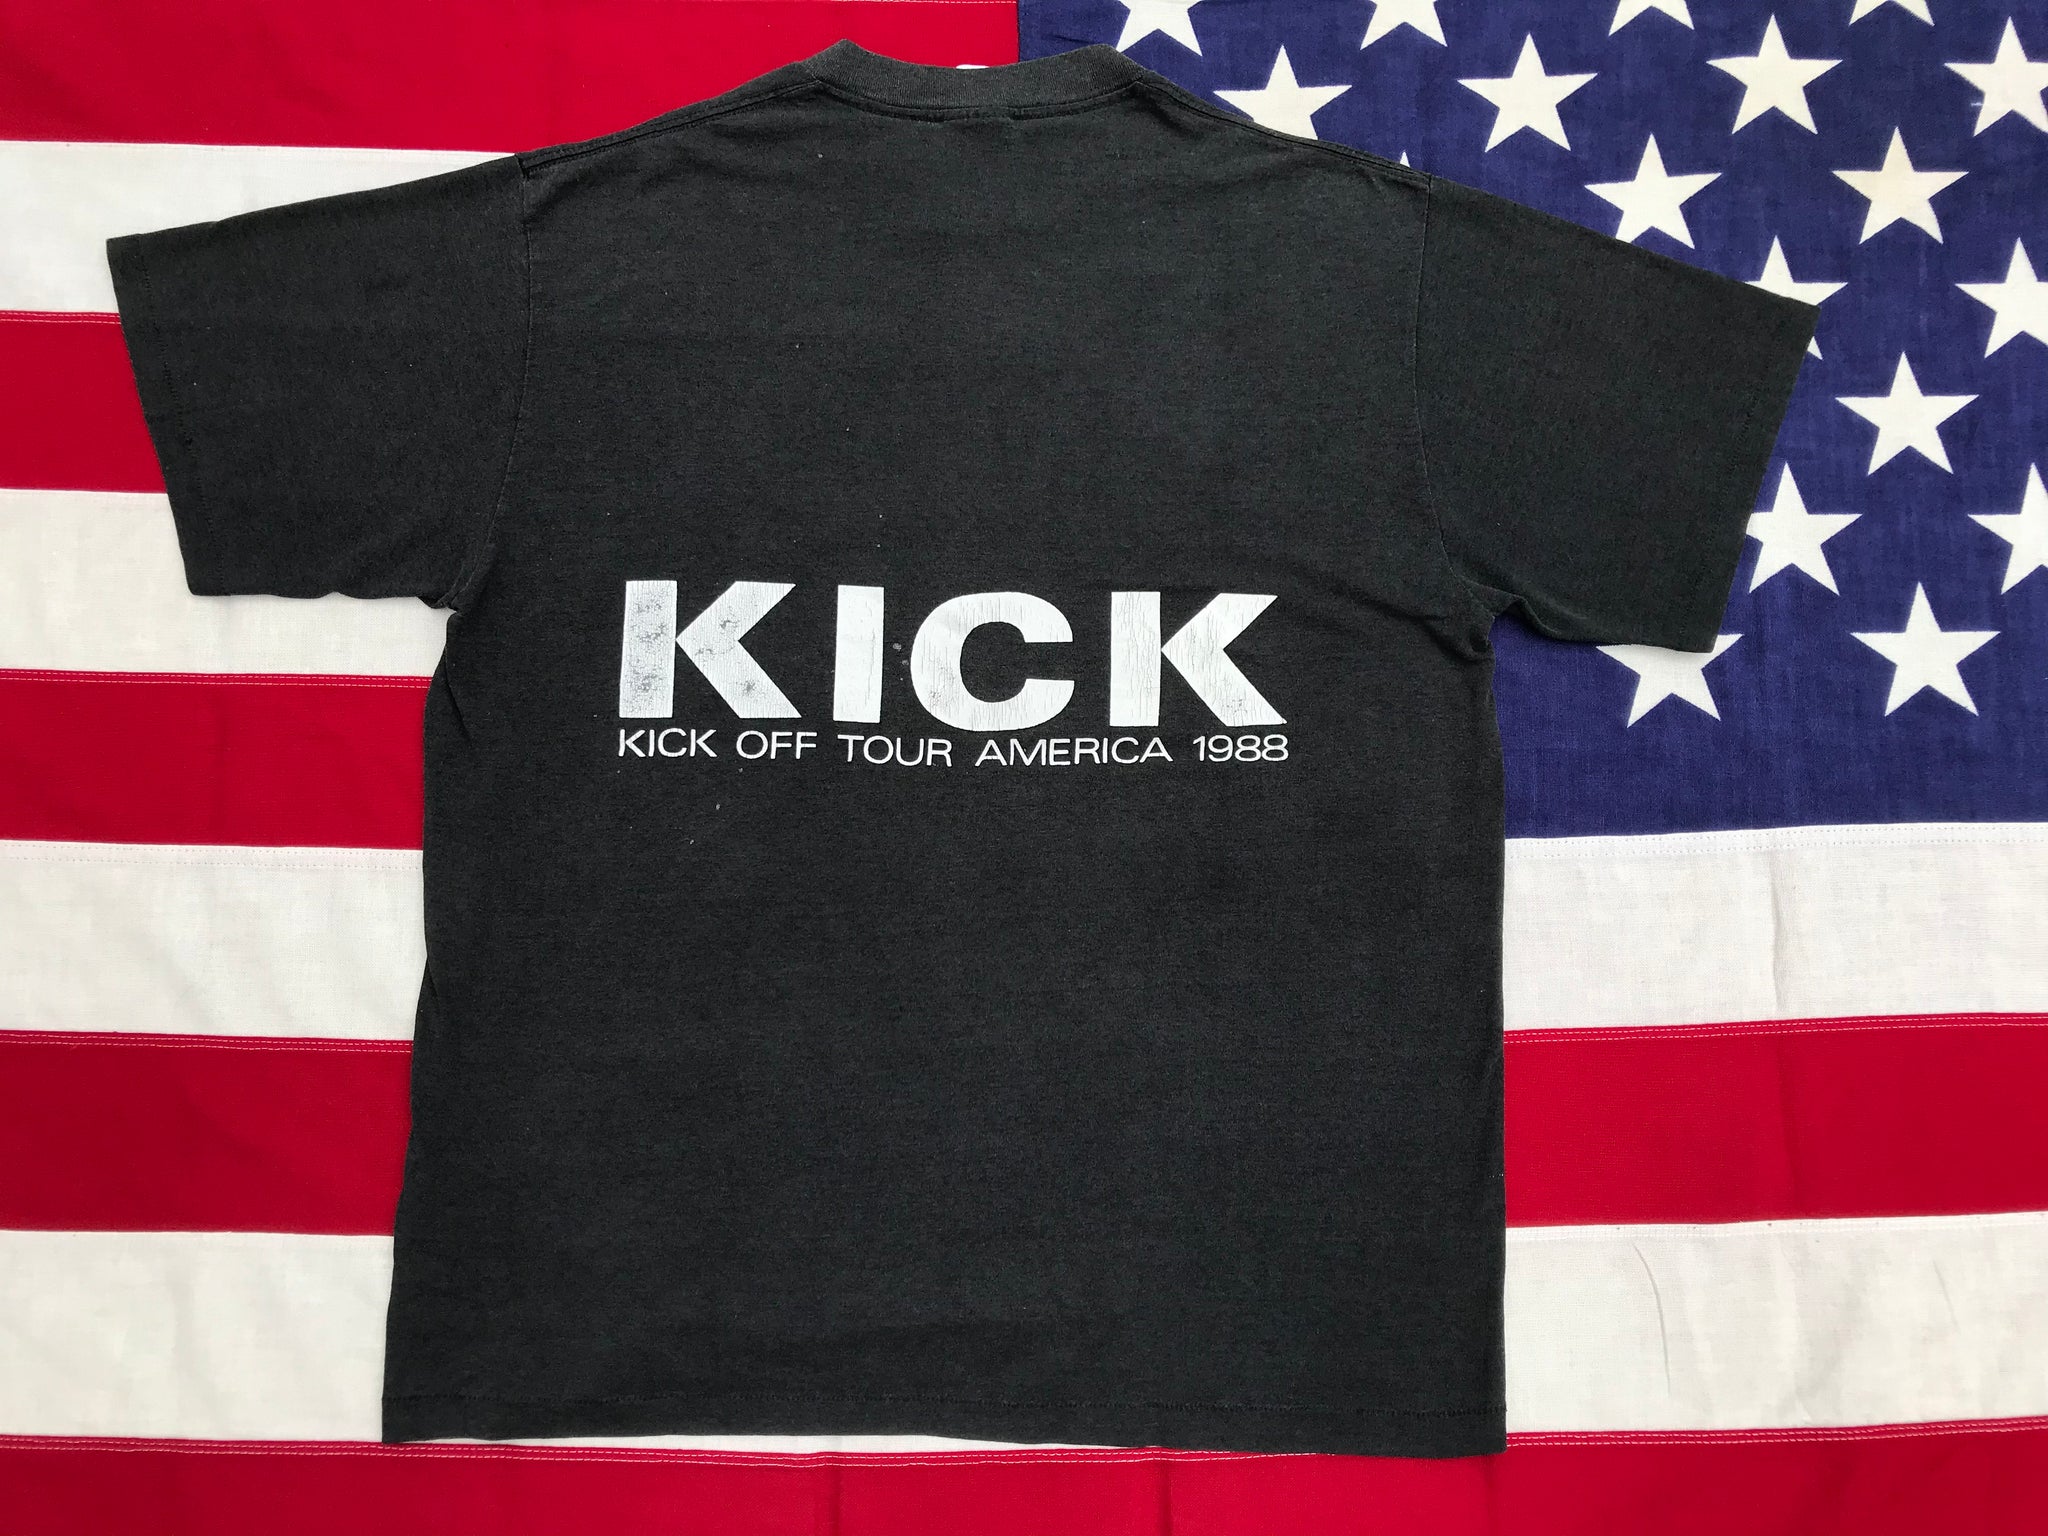 INXS RARE  “ Kick Off Tour America 1988 “ Original Vintage Rock T-Shirt by Spring Ford Classic Sportswear Made in USA